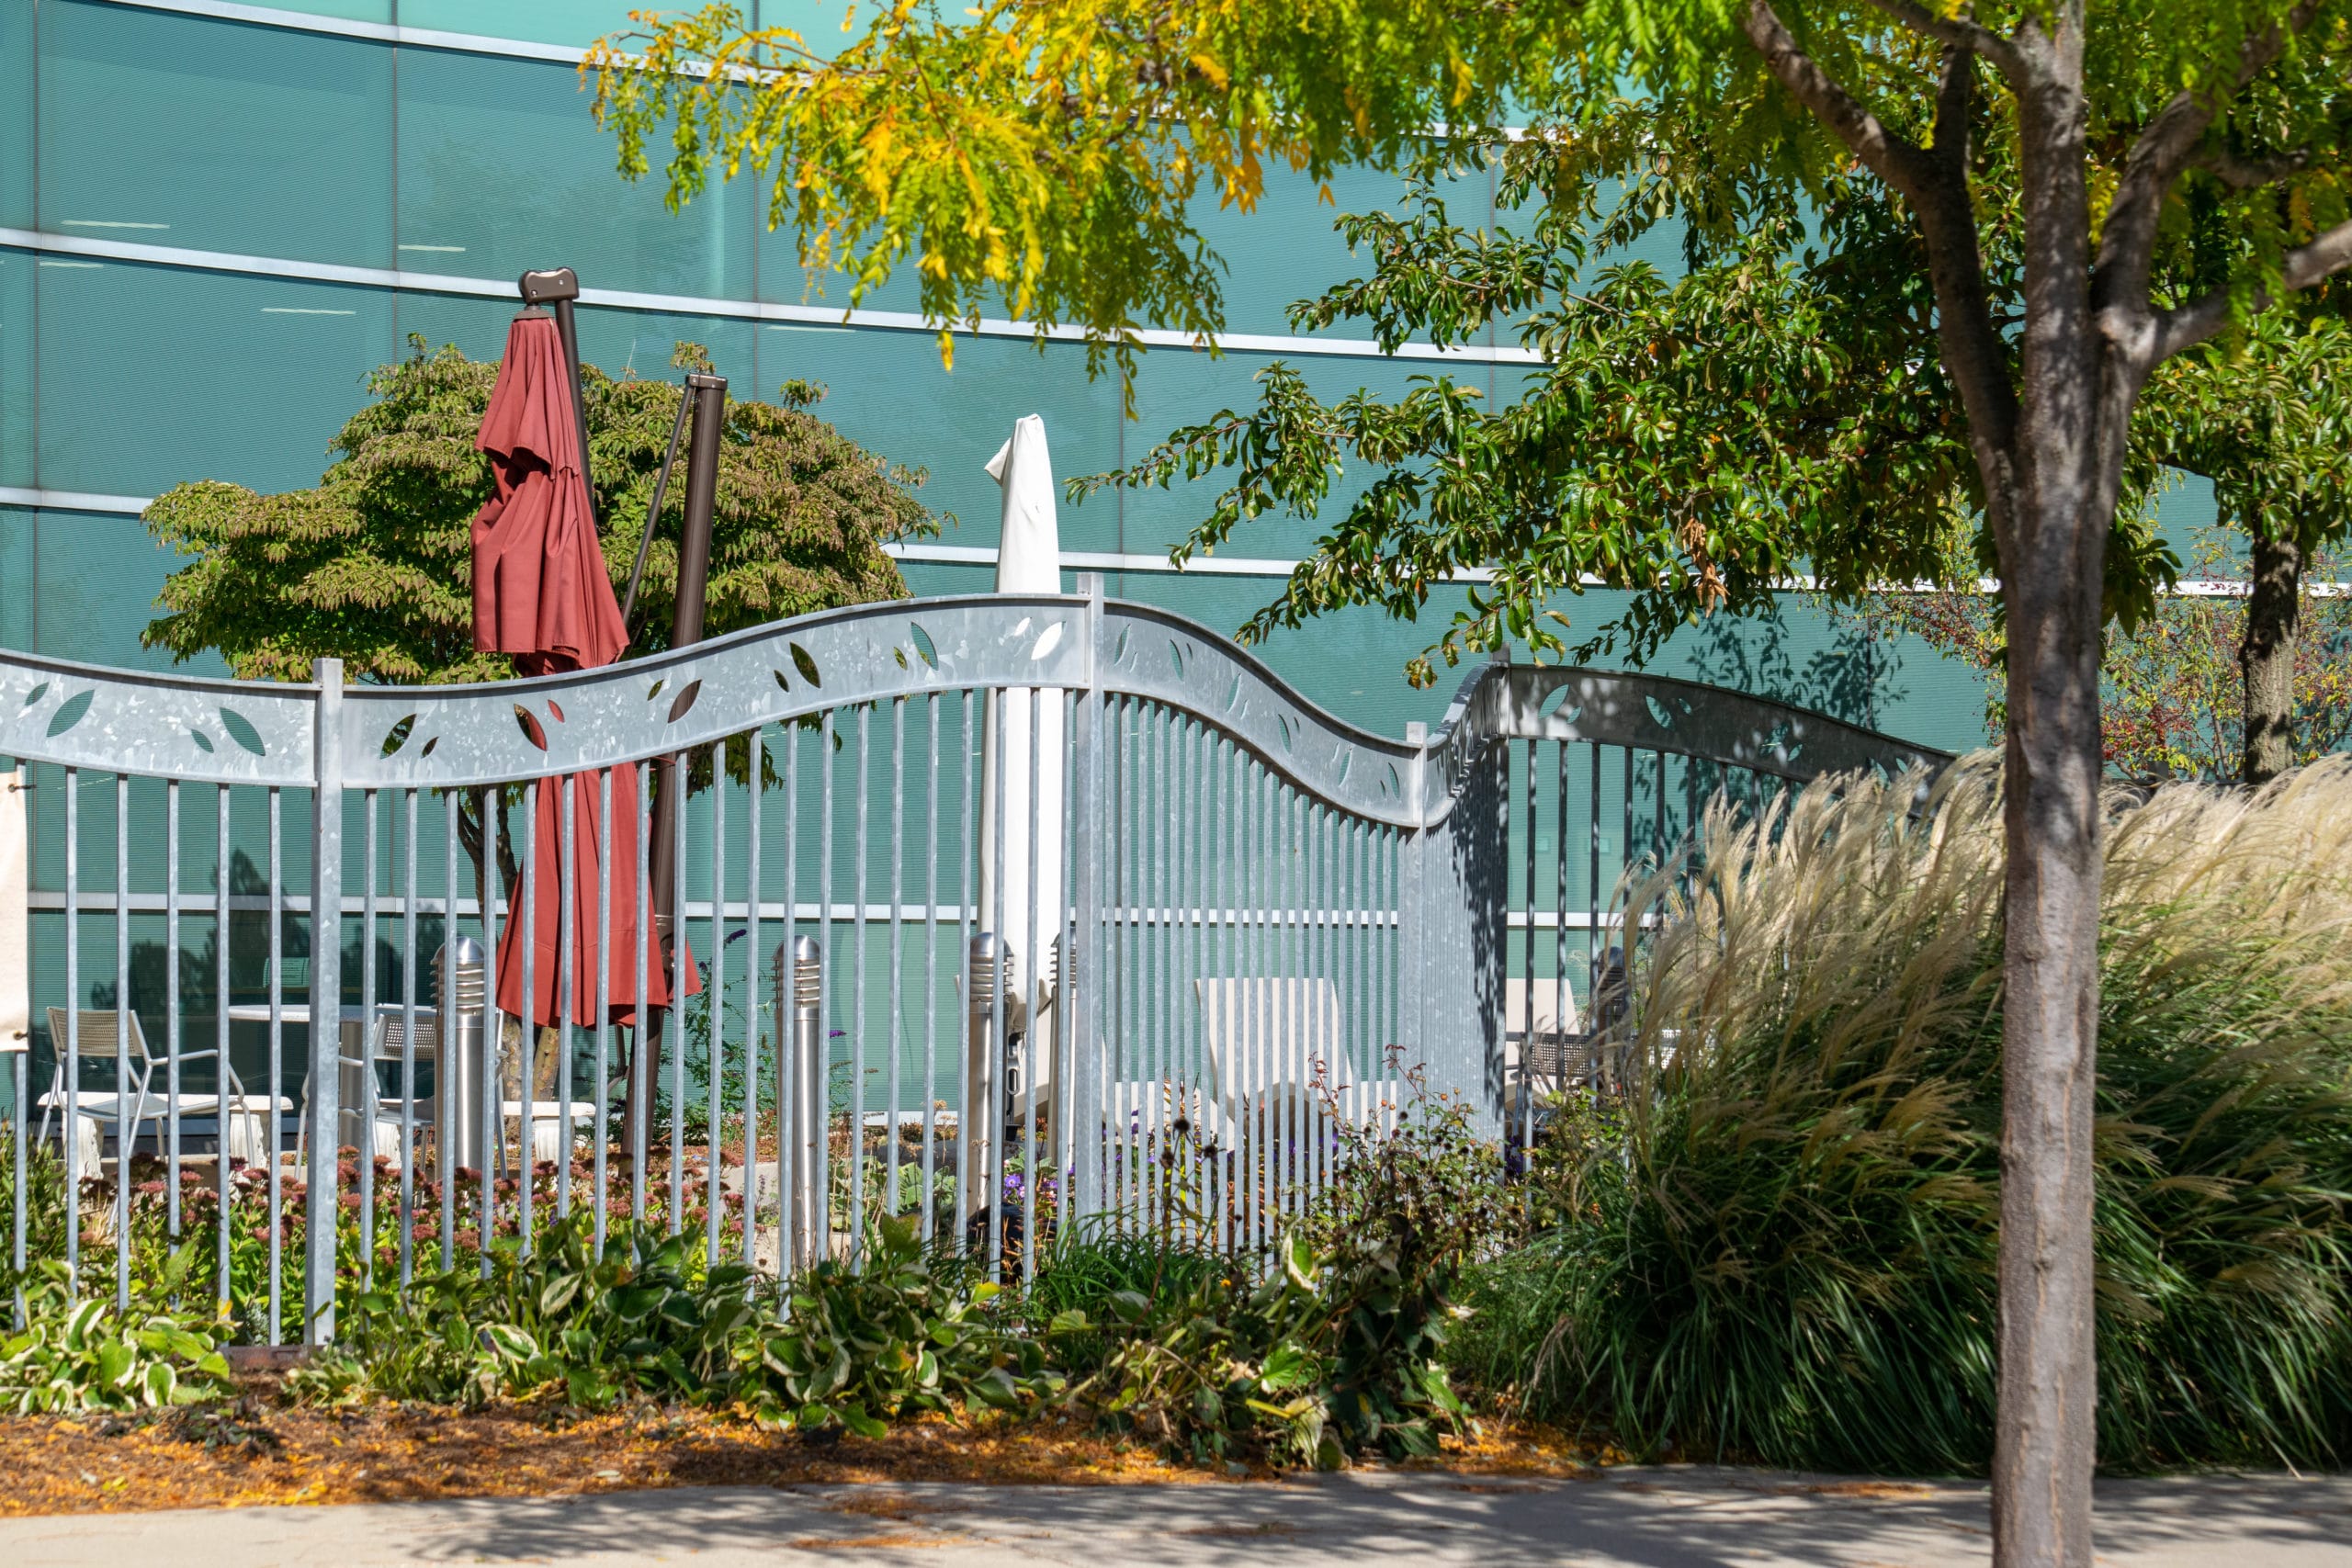 Custom laser-cut metal (galvanized steel) fence and swing gate at Warren Civic Center Library